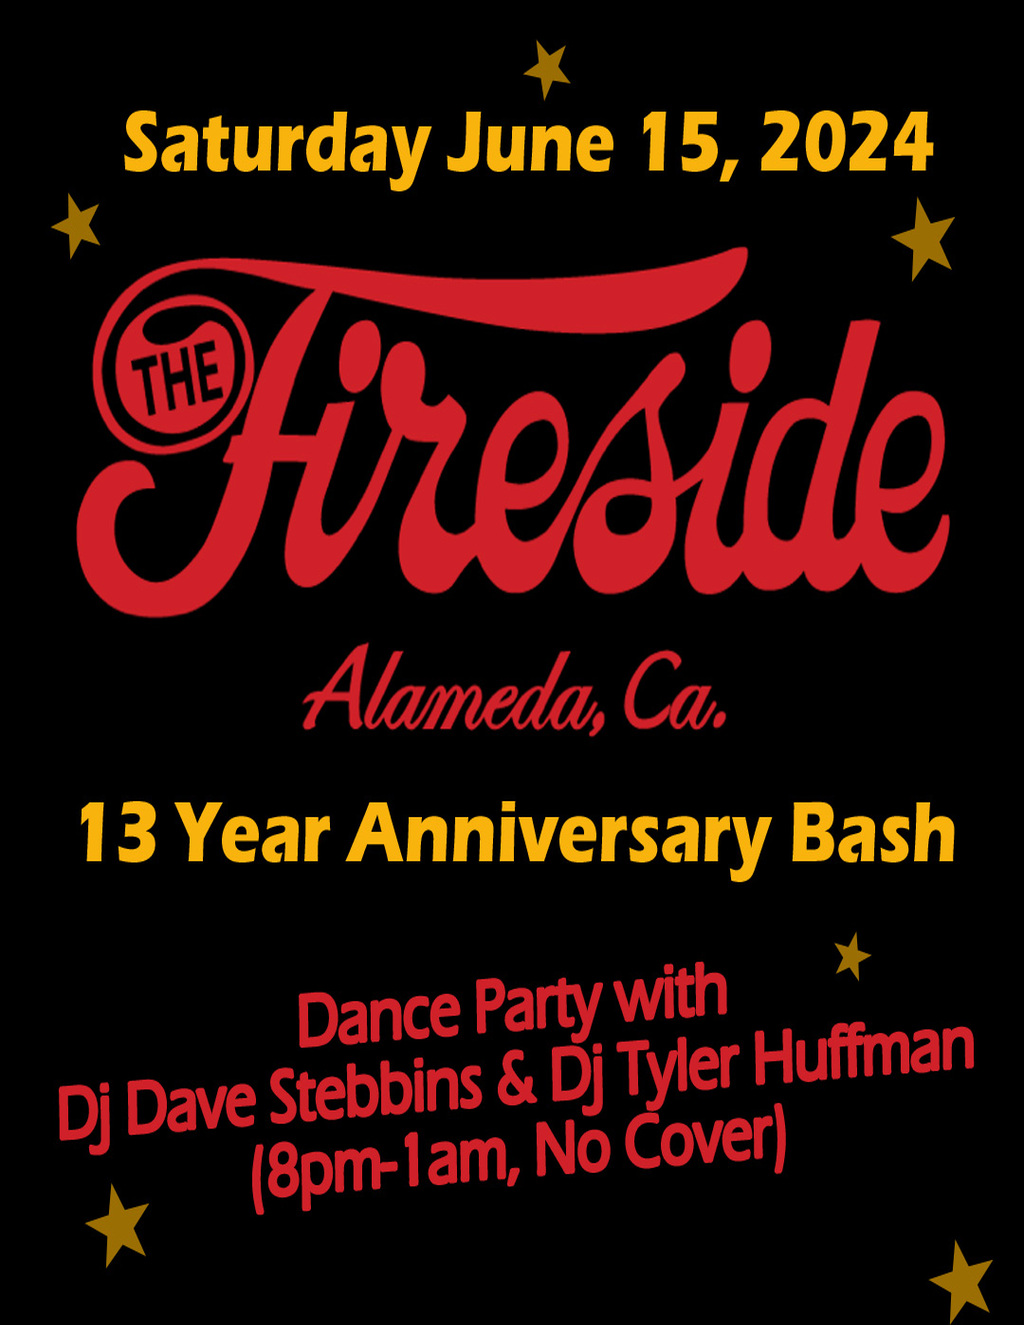 The Fireside Lounge Saturday June 15  2024  The Fireside Lounge Celebrates 13 Years with a Bash Dance Party promotion flier on Digifli com